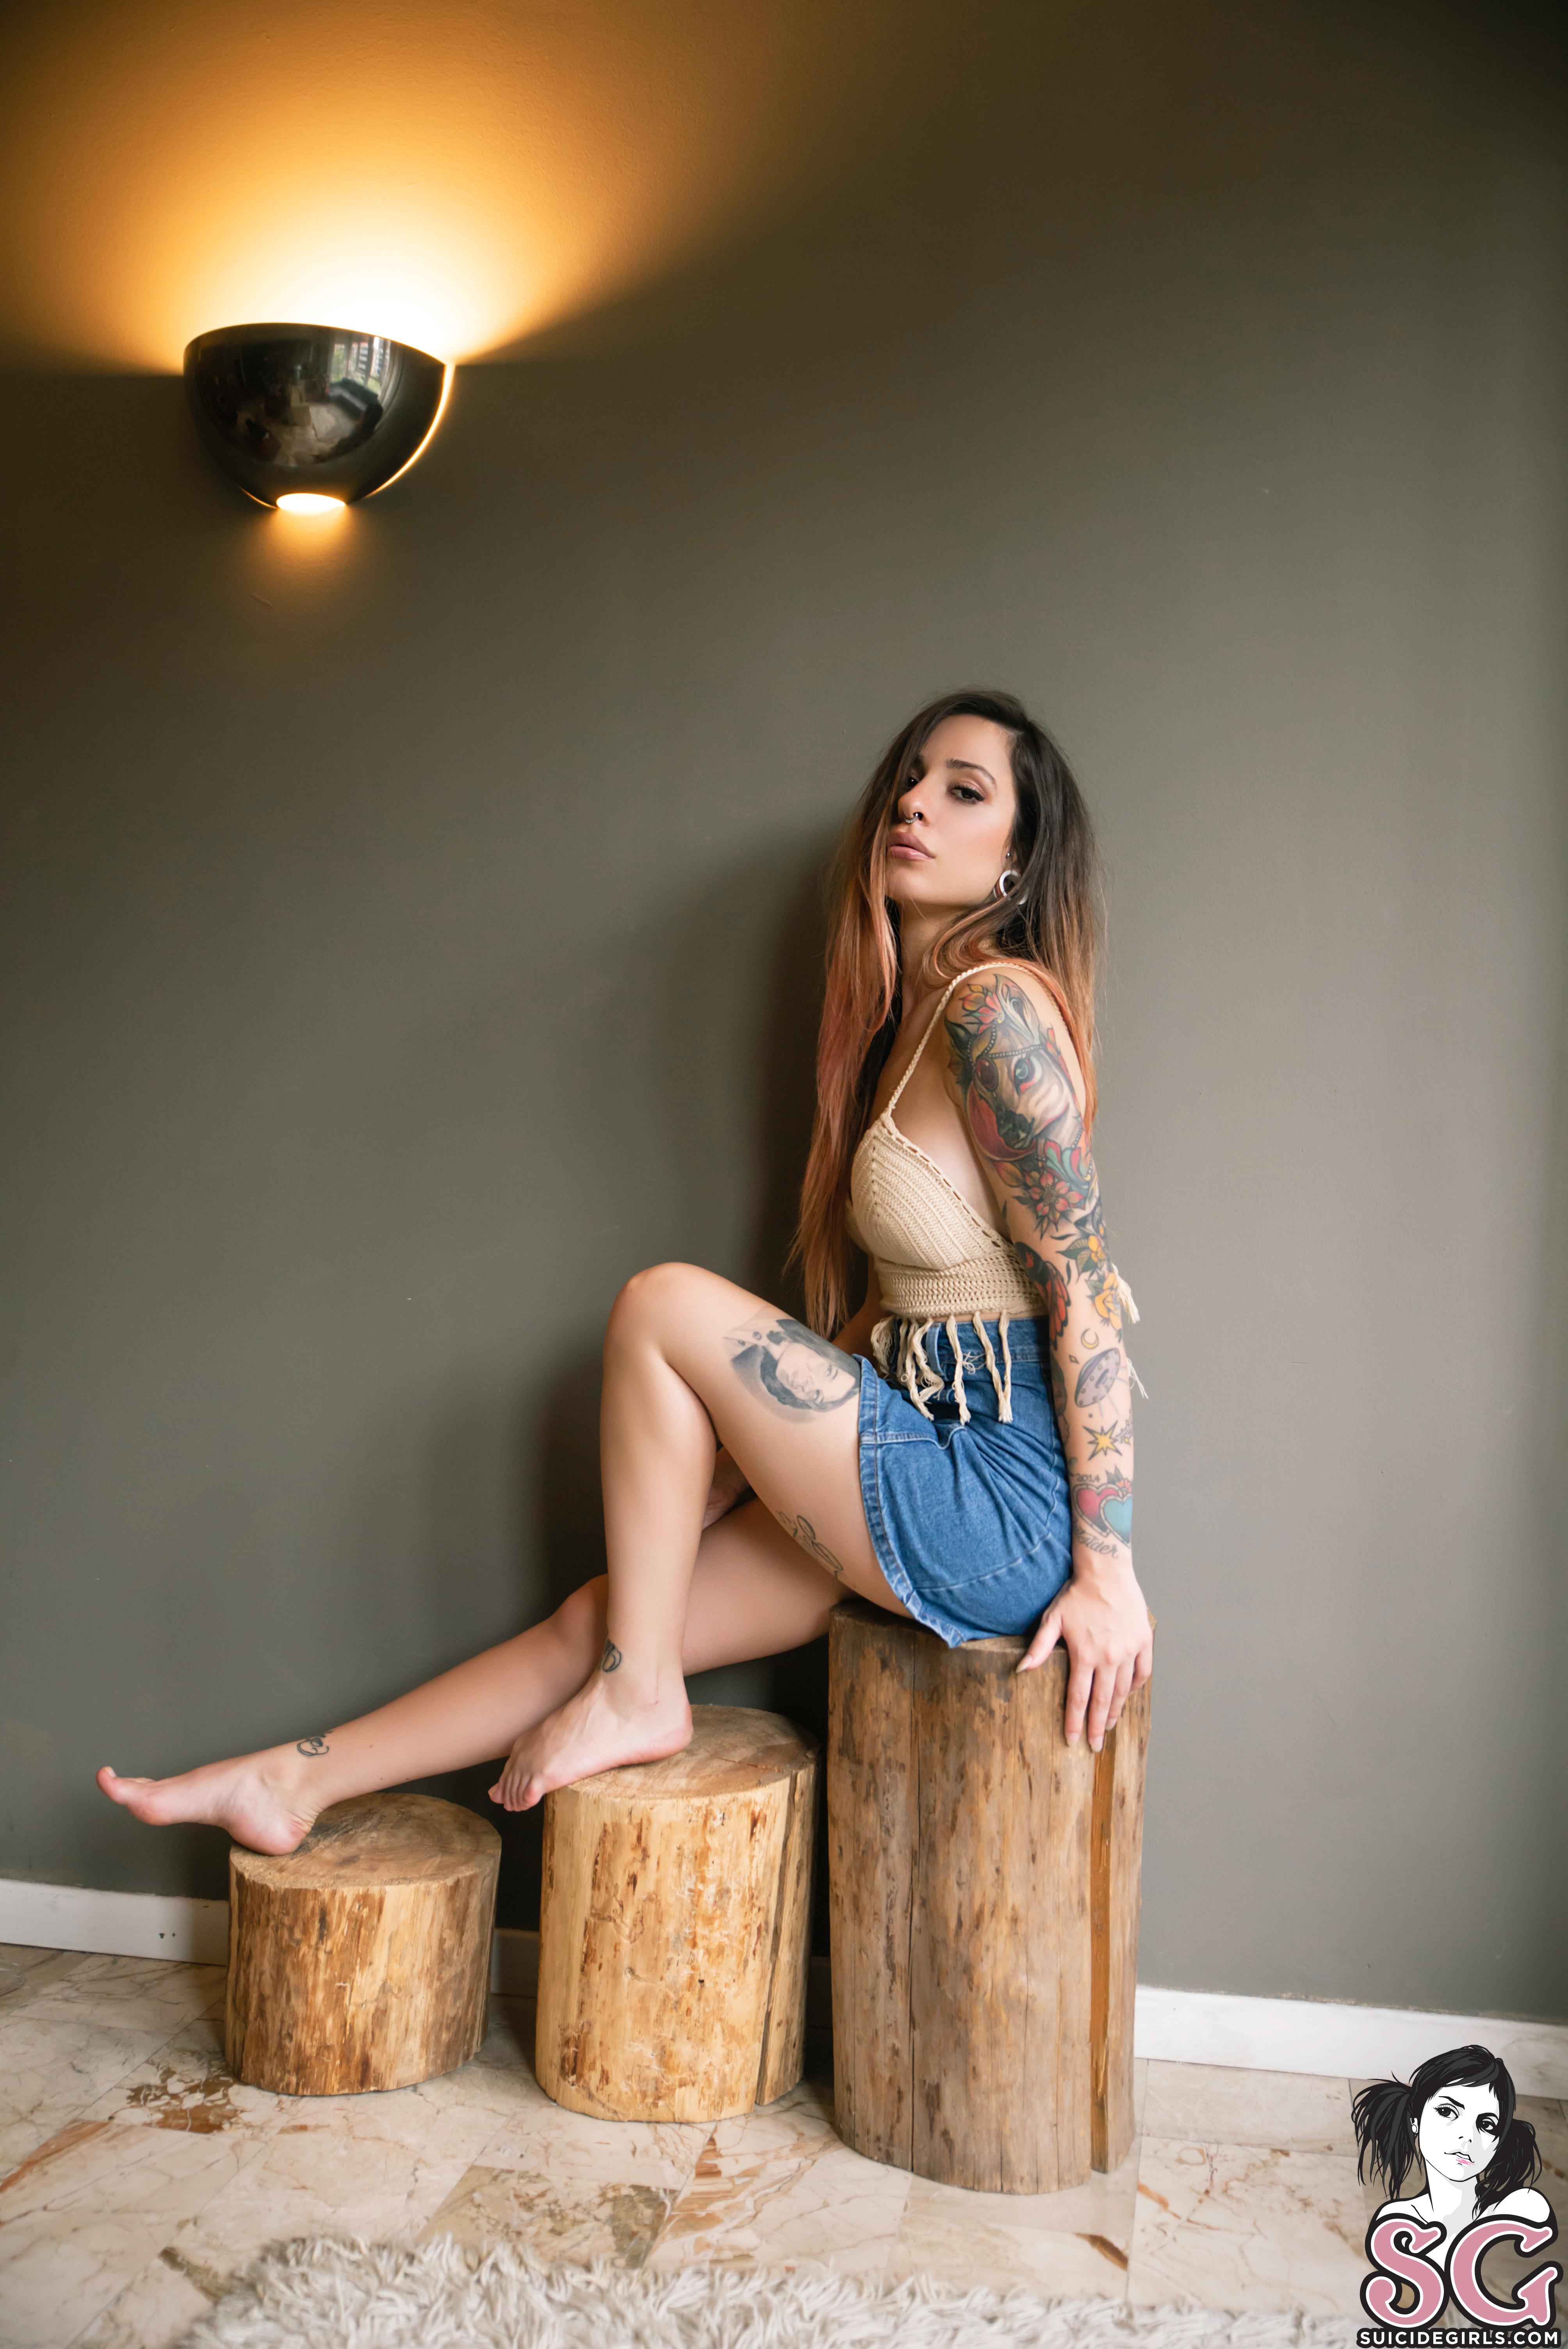 People 4016x6016 women model Suicide Girls women indoors Giuno Suicide brunette looking at viewer inked girls tattoo nose ring portrait display watermarked